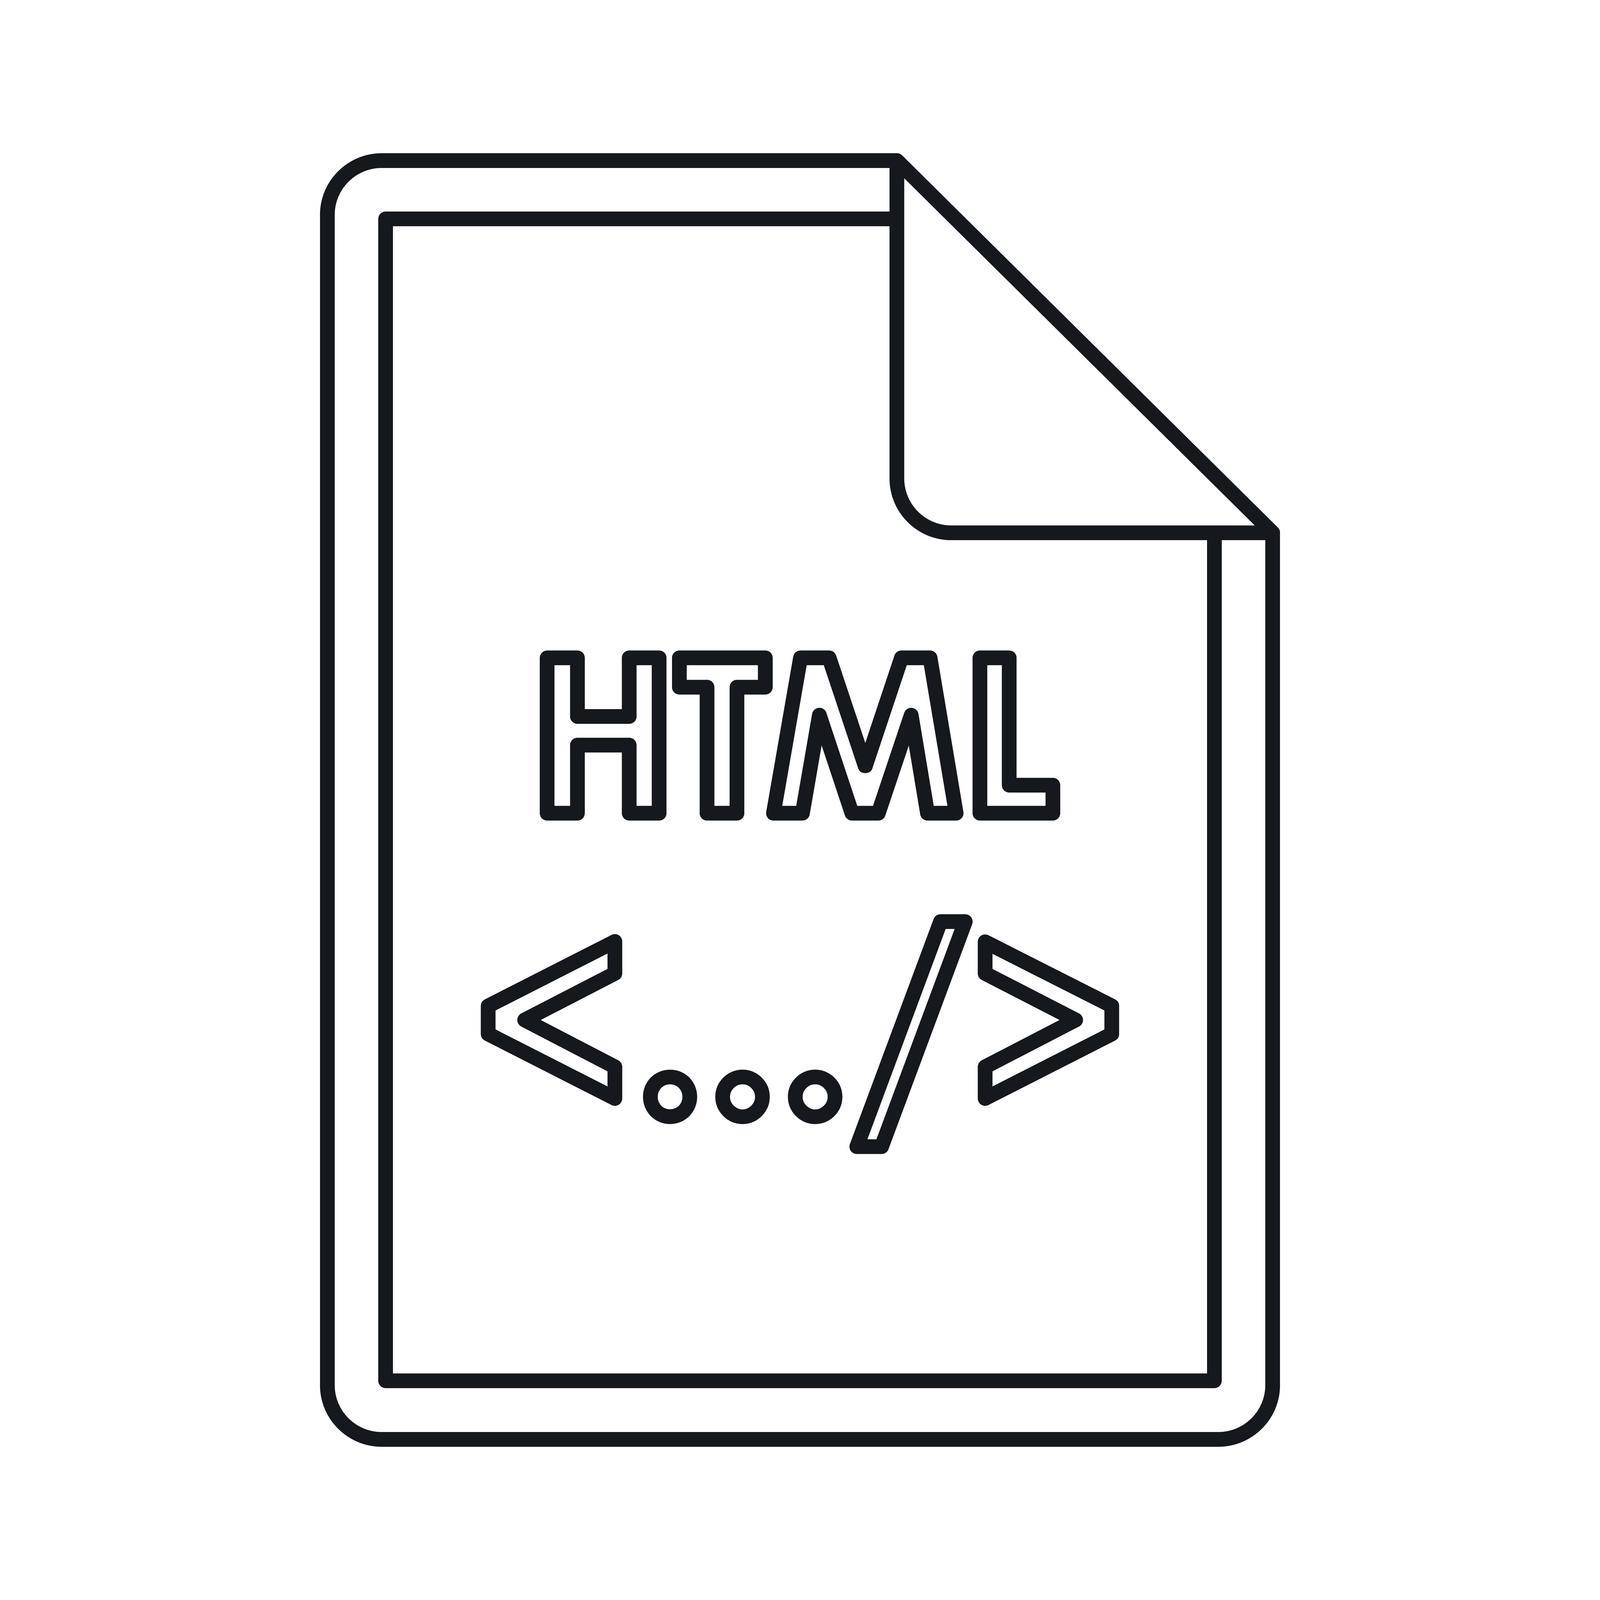 HTML file extension icon, outline style by ylivdesign